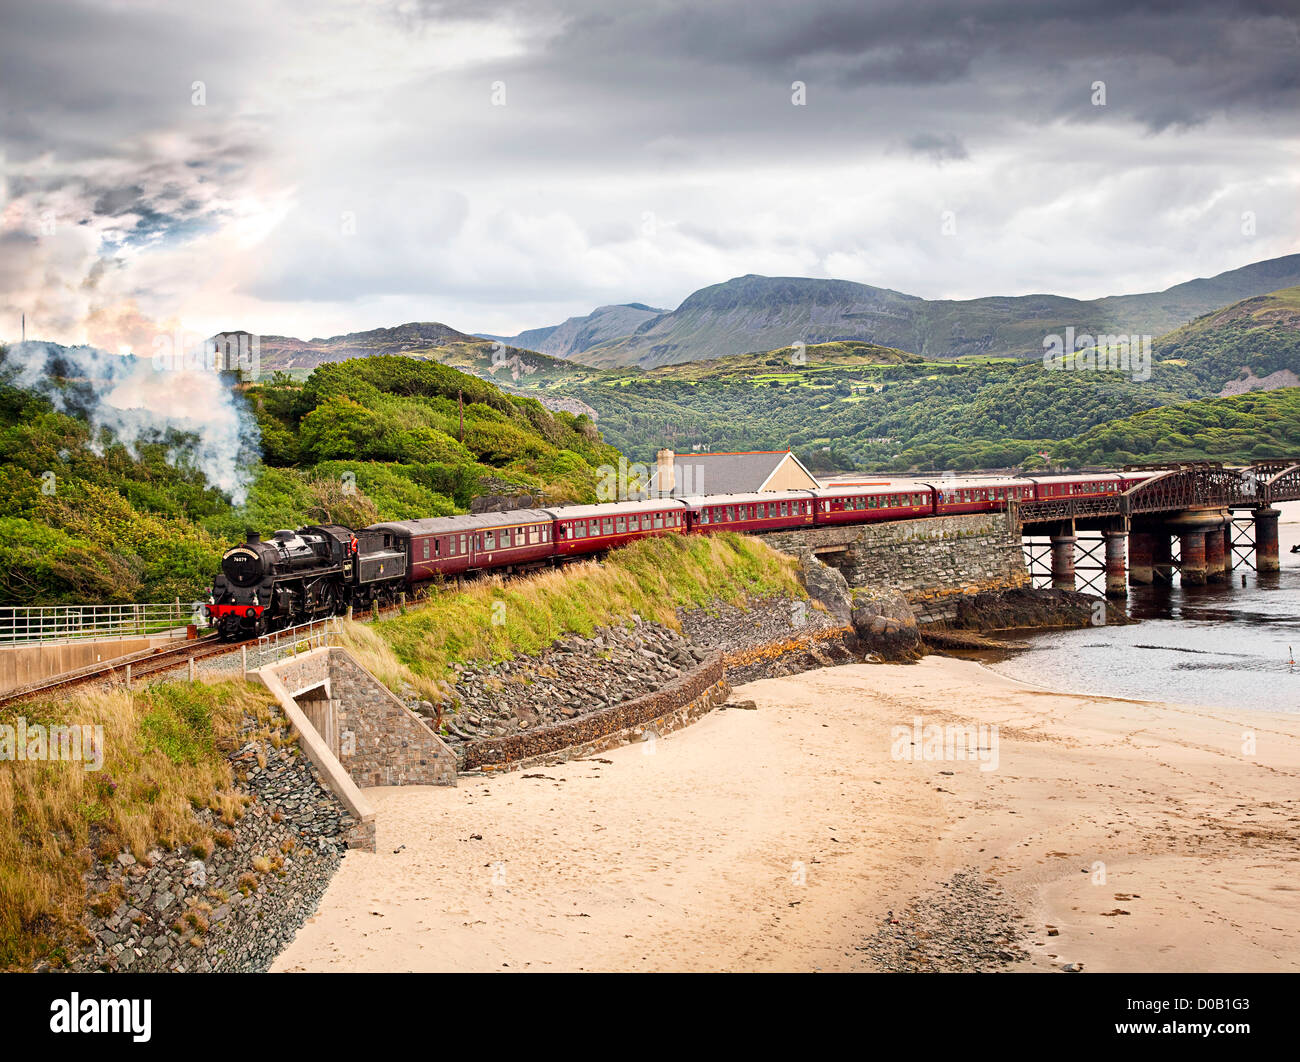 Steam train the Cambrian crosses Barmouth rail bridge over the Mawddach estuary with mountains in the background, near beach. Stock Photo